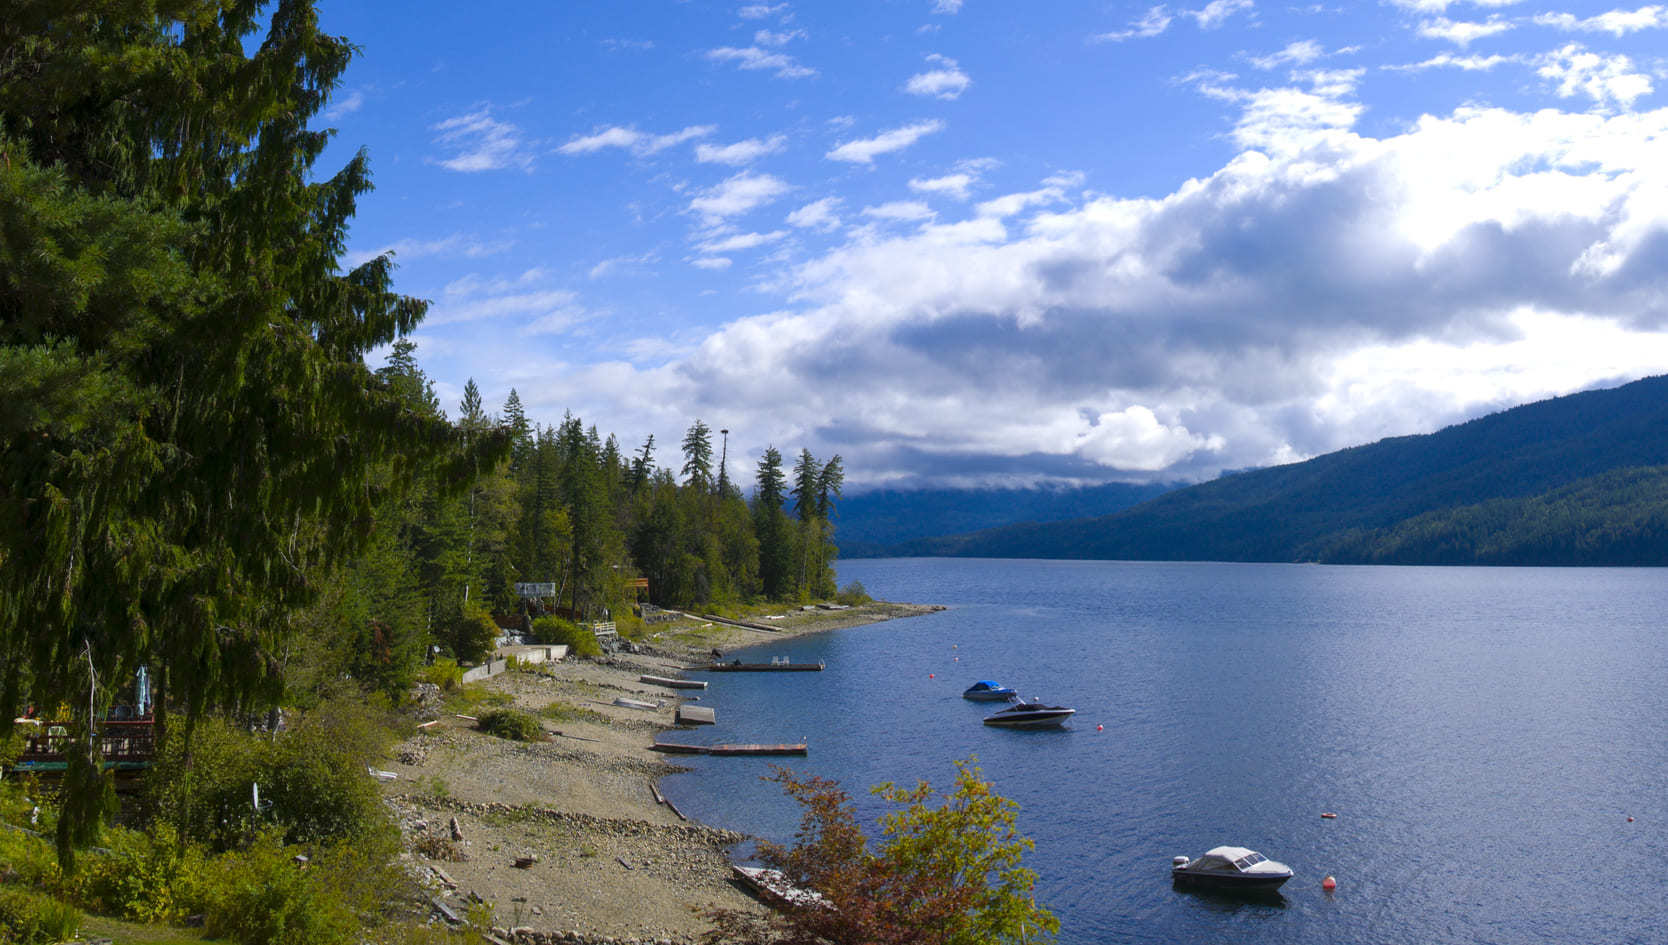 Waterfront property with boat dock in the North Shuswap area of British Columbia